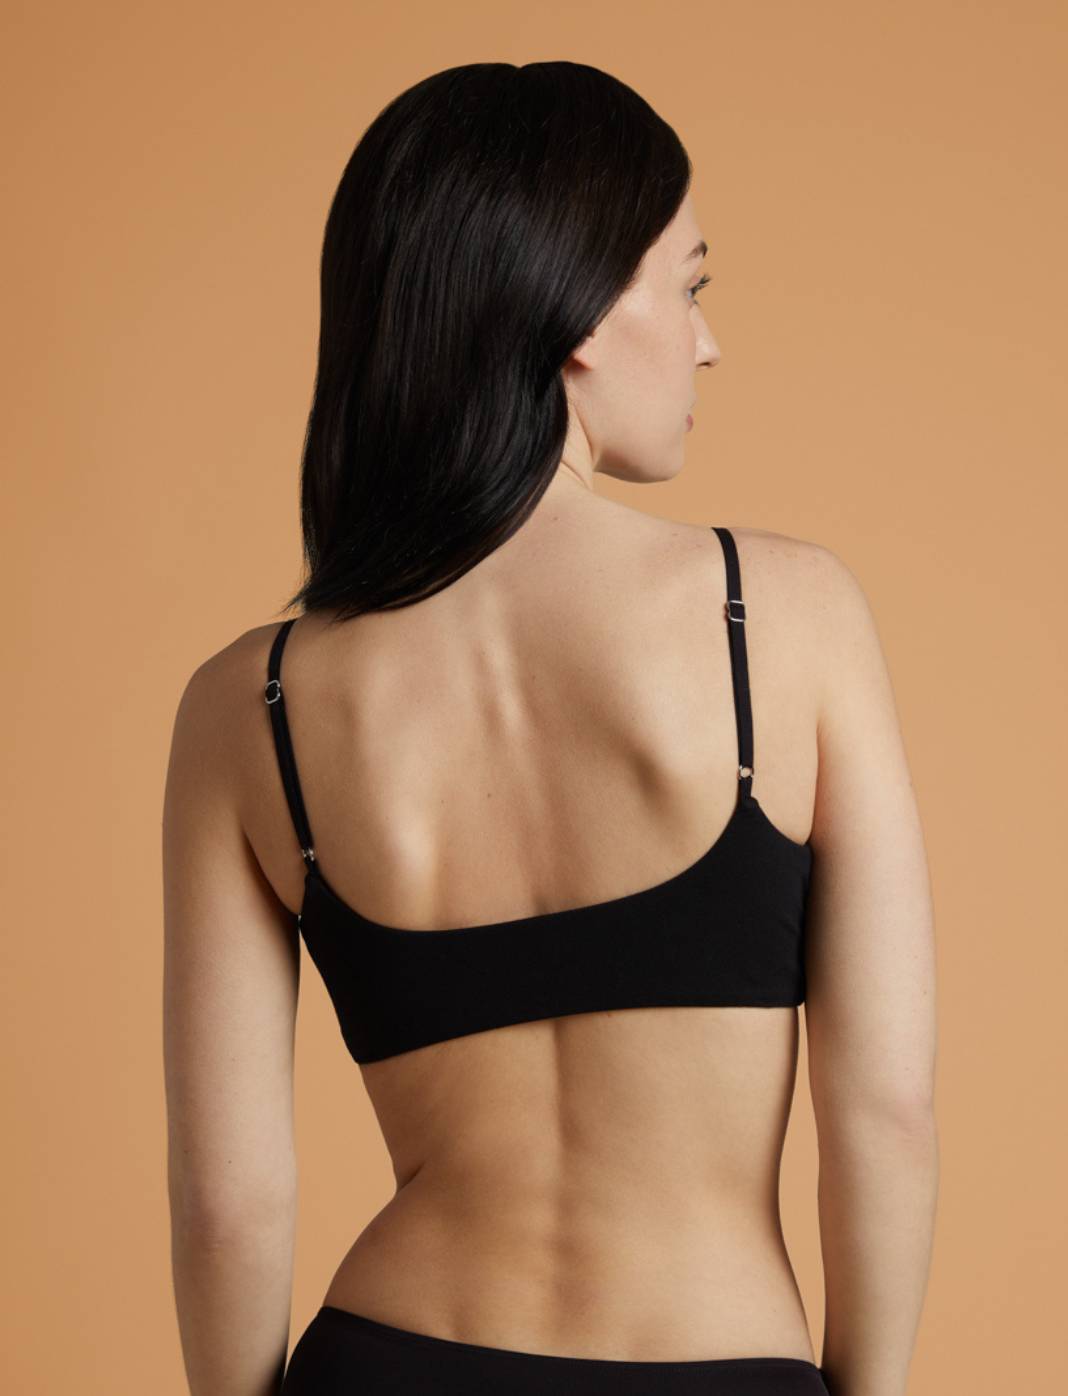 Front Fastening Bra with VELCRO Brand Fasteners